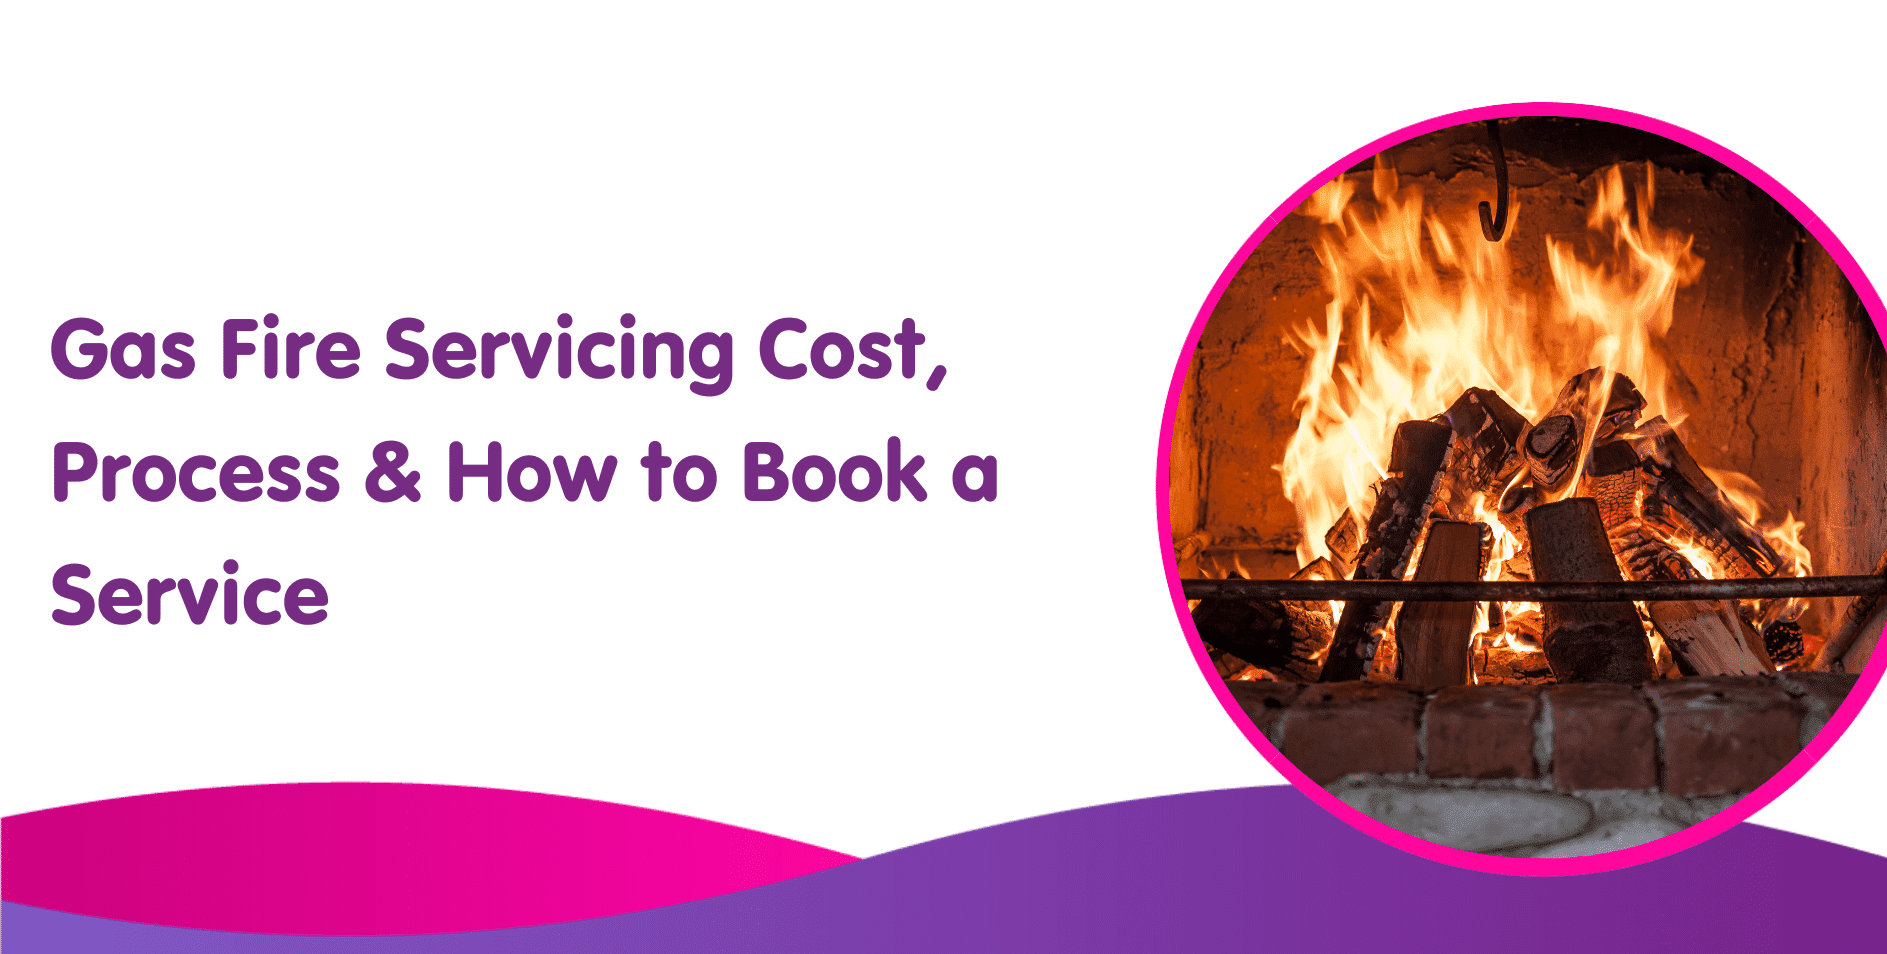 Gas Fire Servicing Cost, Process & How to Book a Service